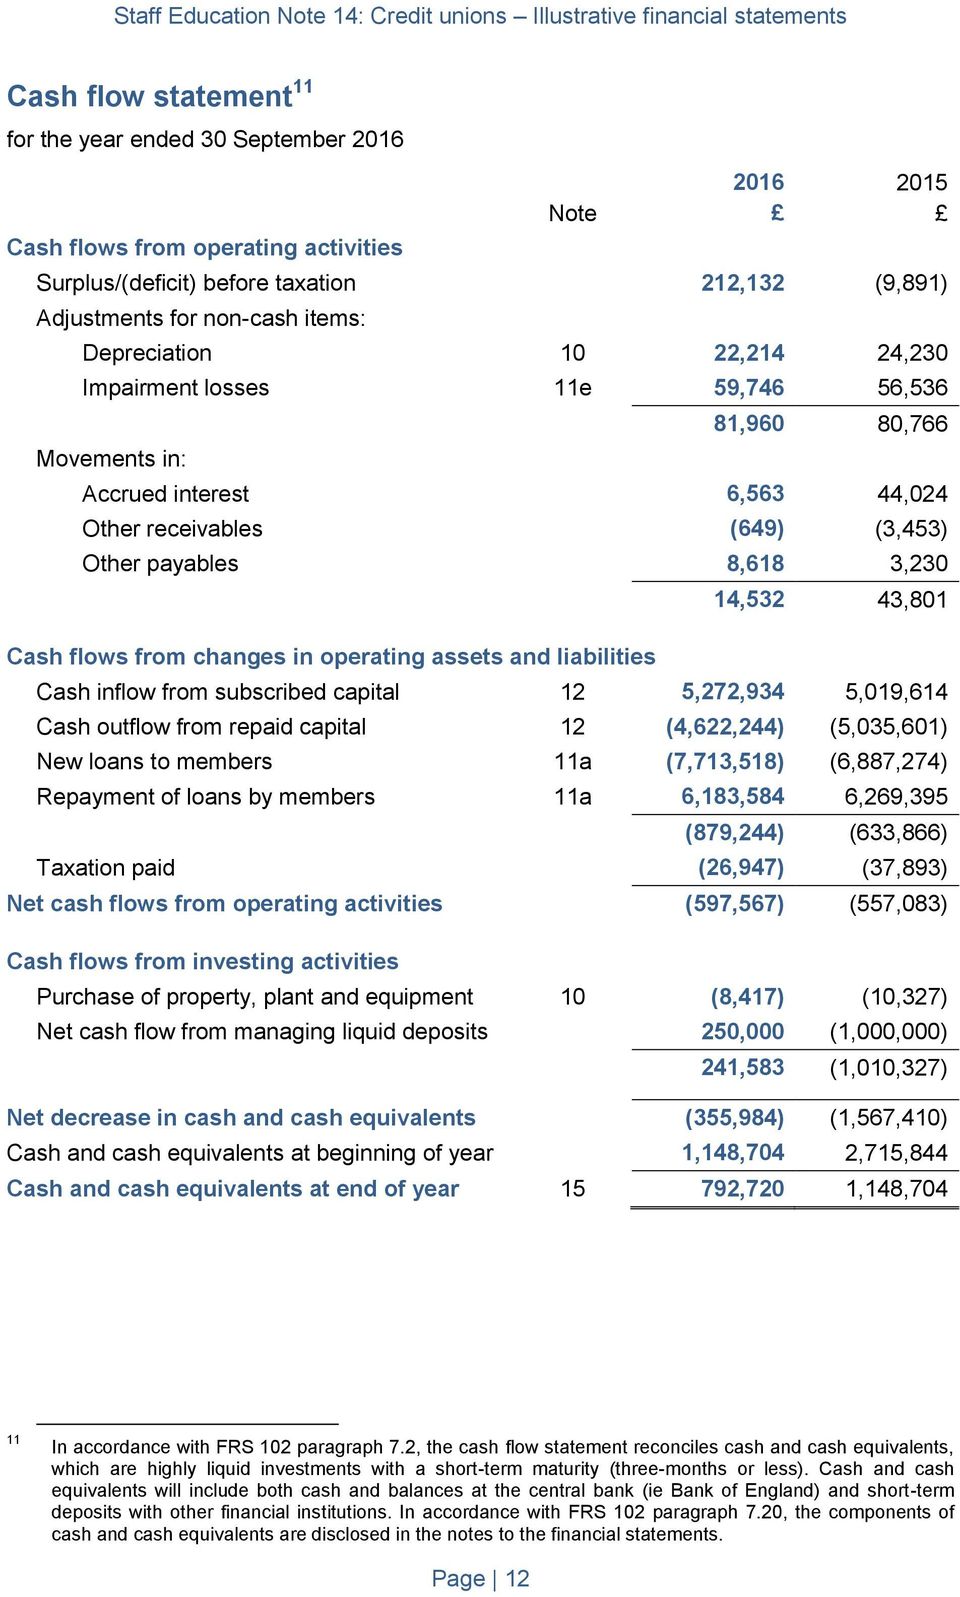 operating assets and liabilities 14,532 43,801 Cash inflow from subscribed capital 12 5,272,934 5,019,614 Cash outflow from repaid capital 12 (4,622,244) (5,035,601) New loans to members 11a